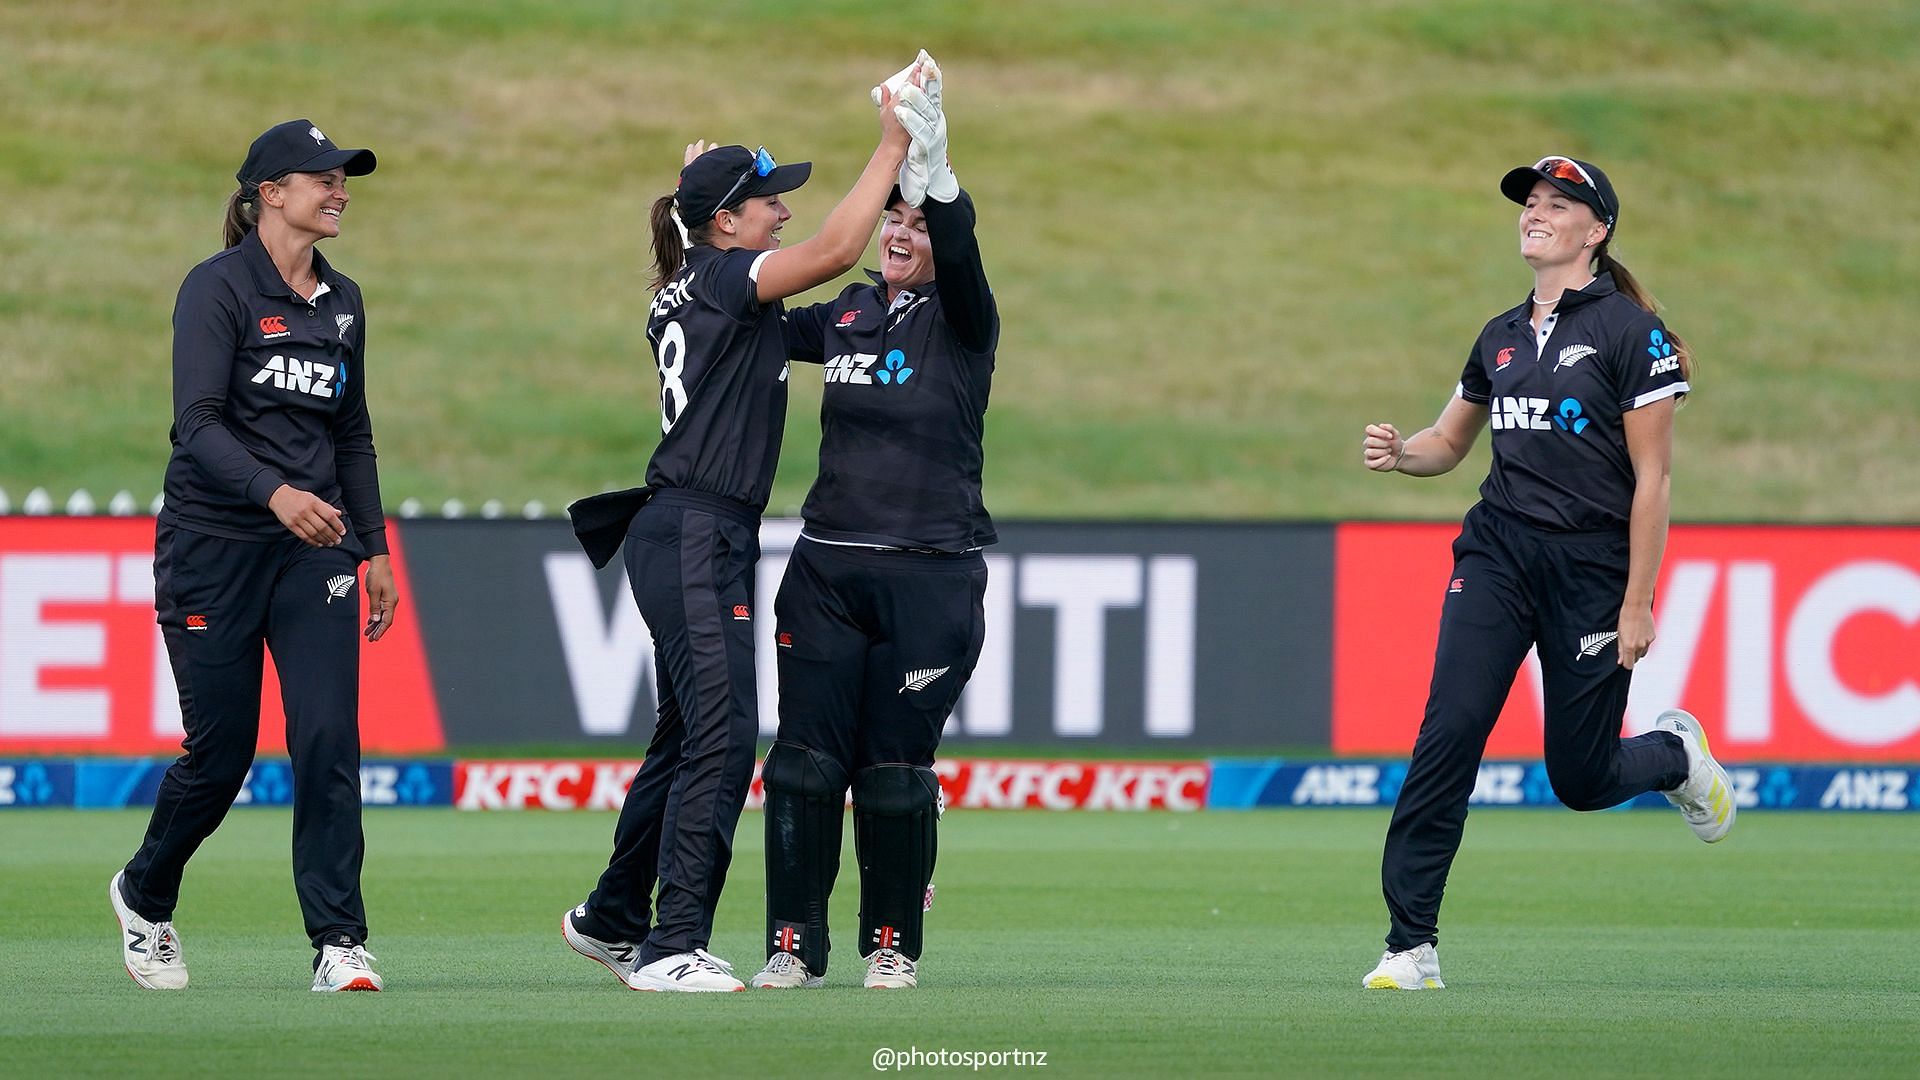 <div class="paragraphs"><p>NZ women's cricketers will now get same match fee as the male cricketers.</p></div>